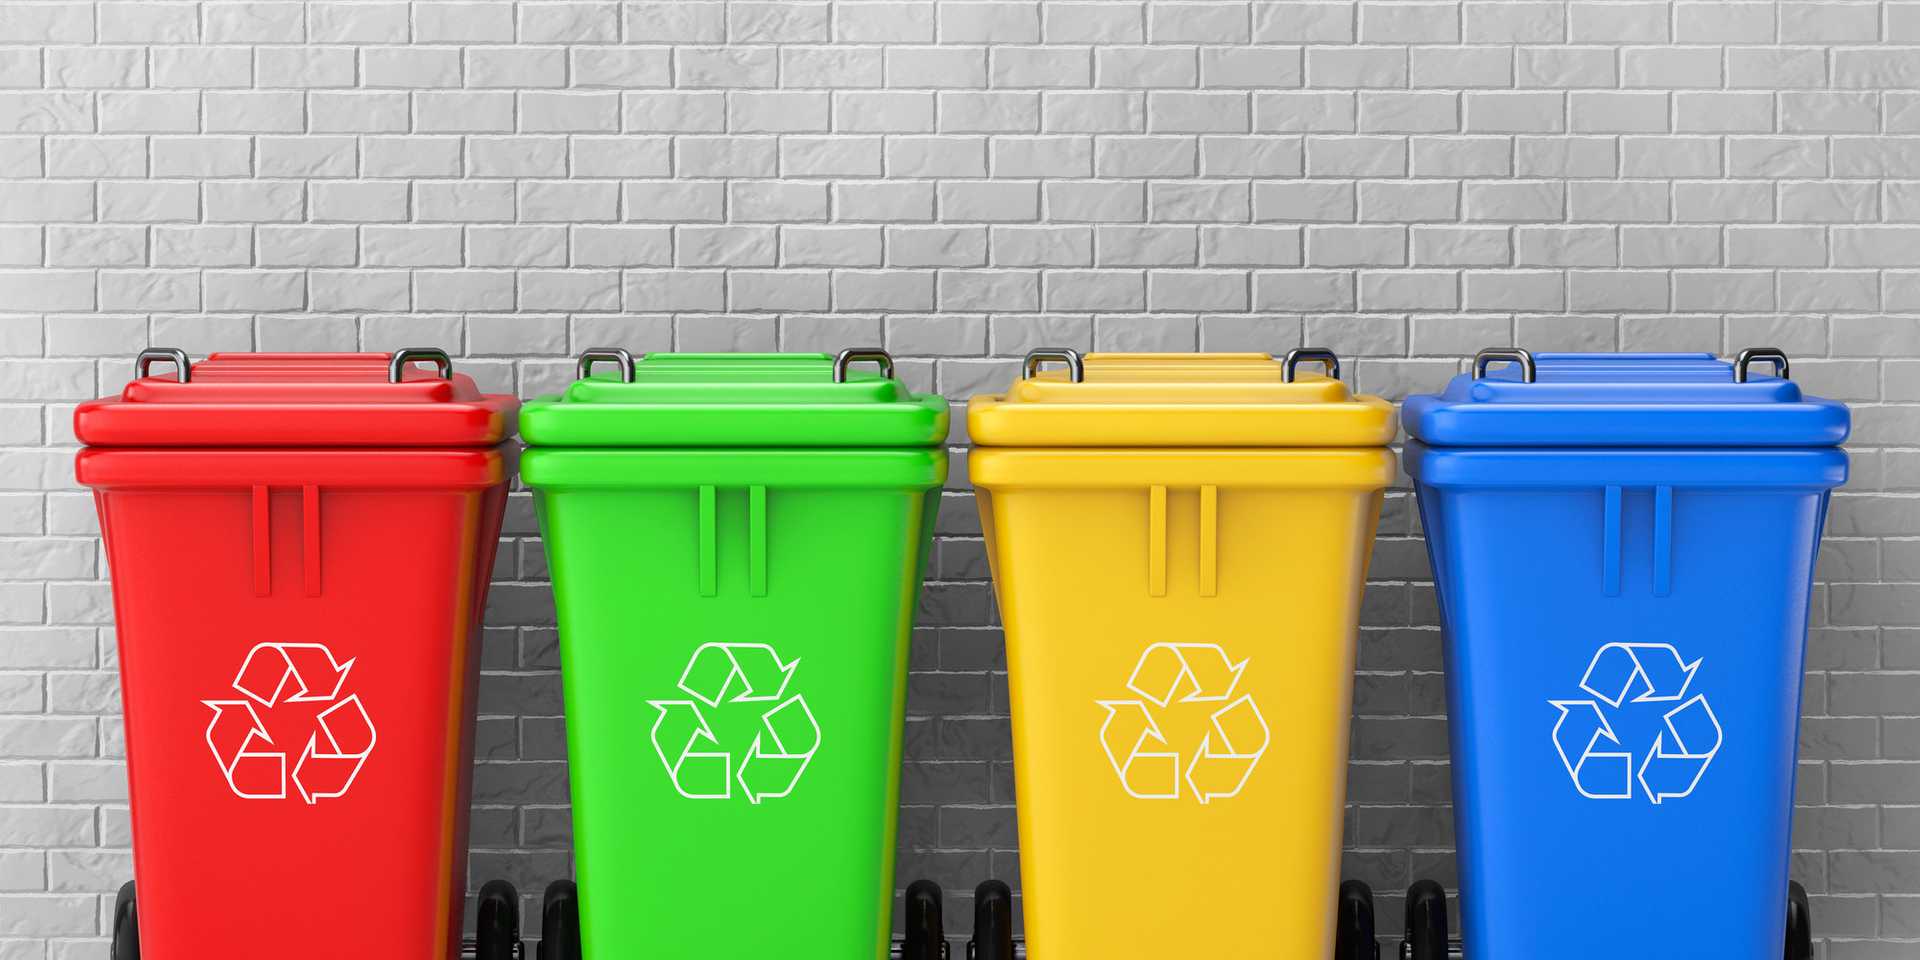 A line of red, green, yellow and blue recycling bins